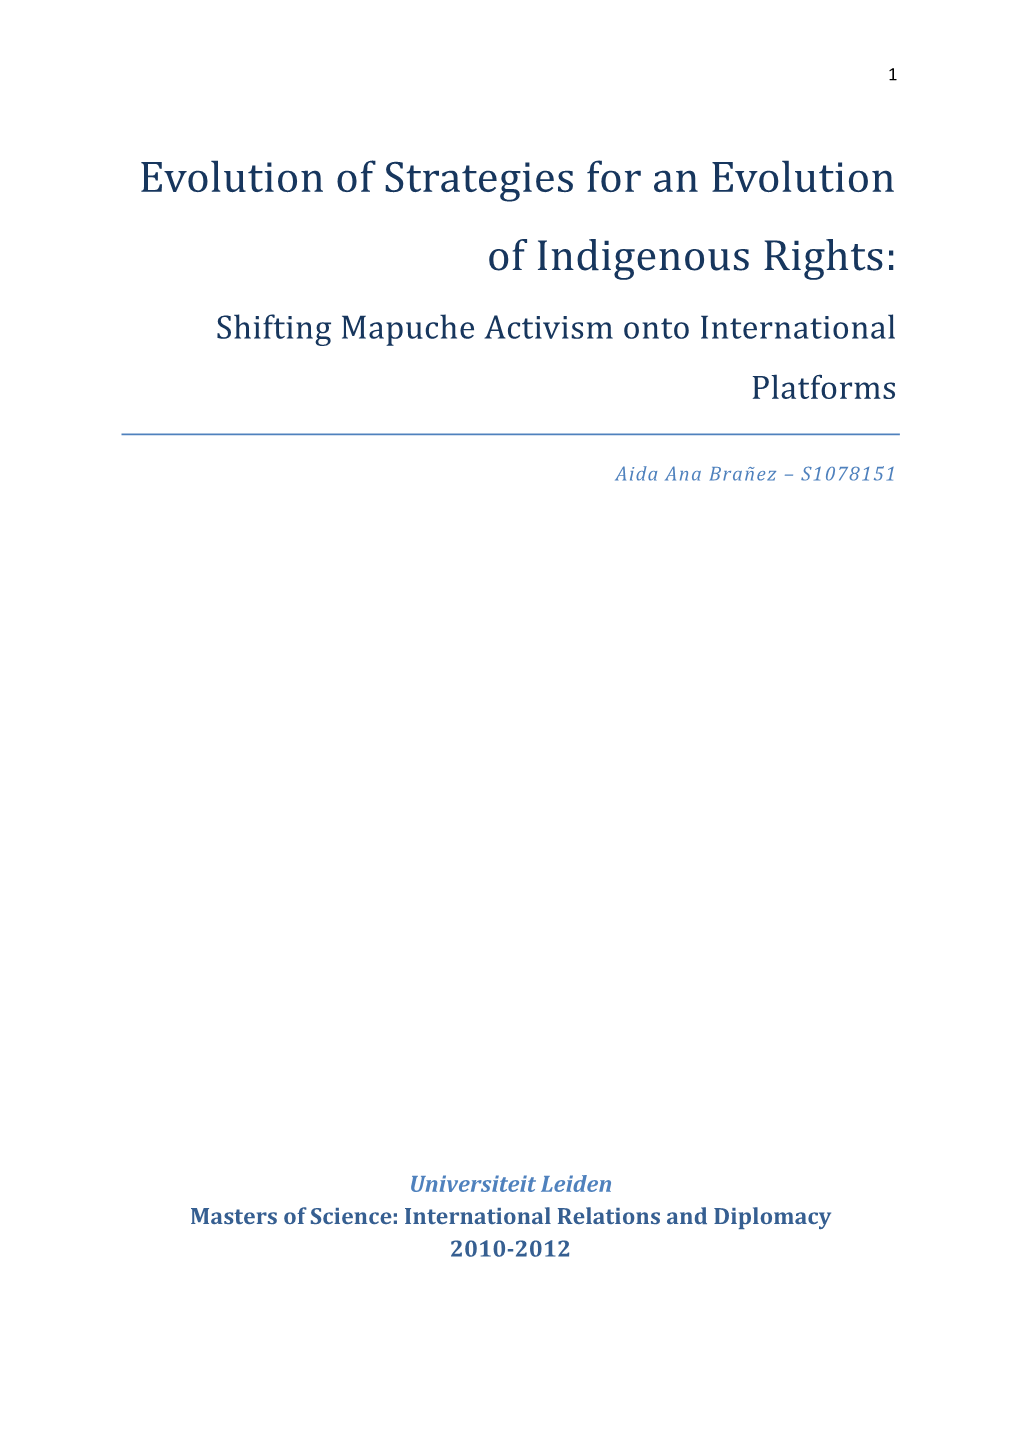 Evolution of Strategies for an Evolution of Indigenous Rights: Shifting Mapuche Activism Onto International Platforms